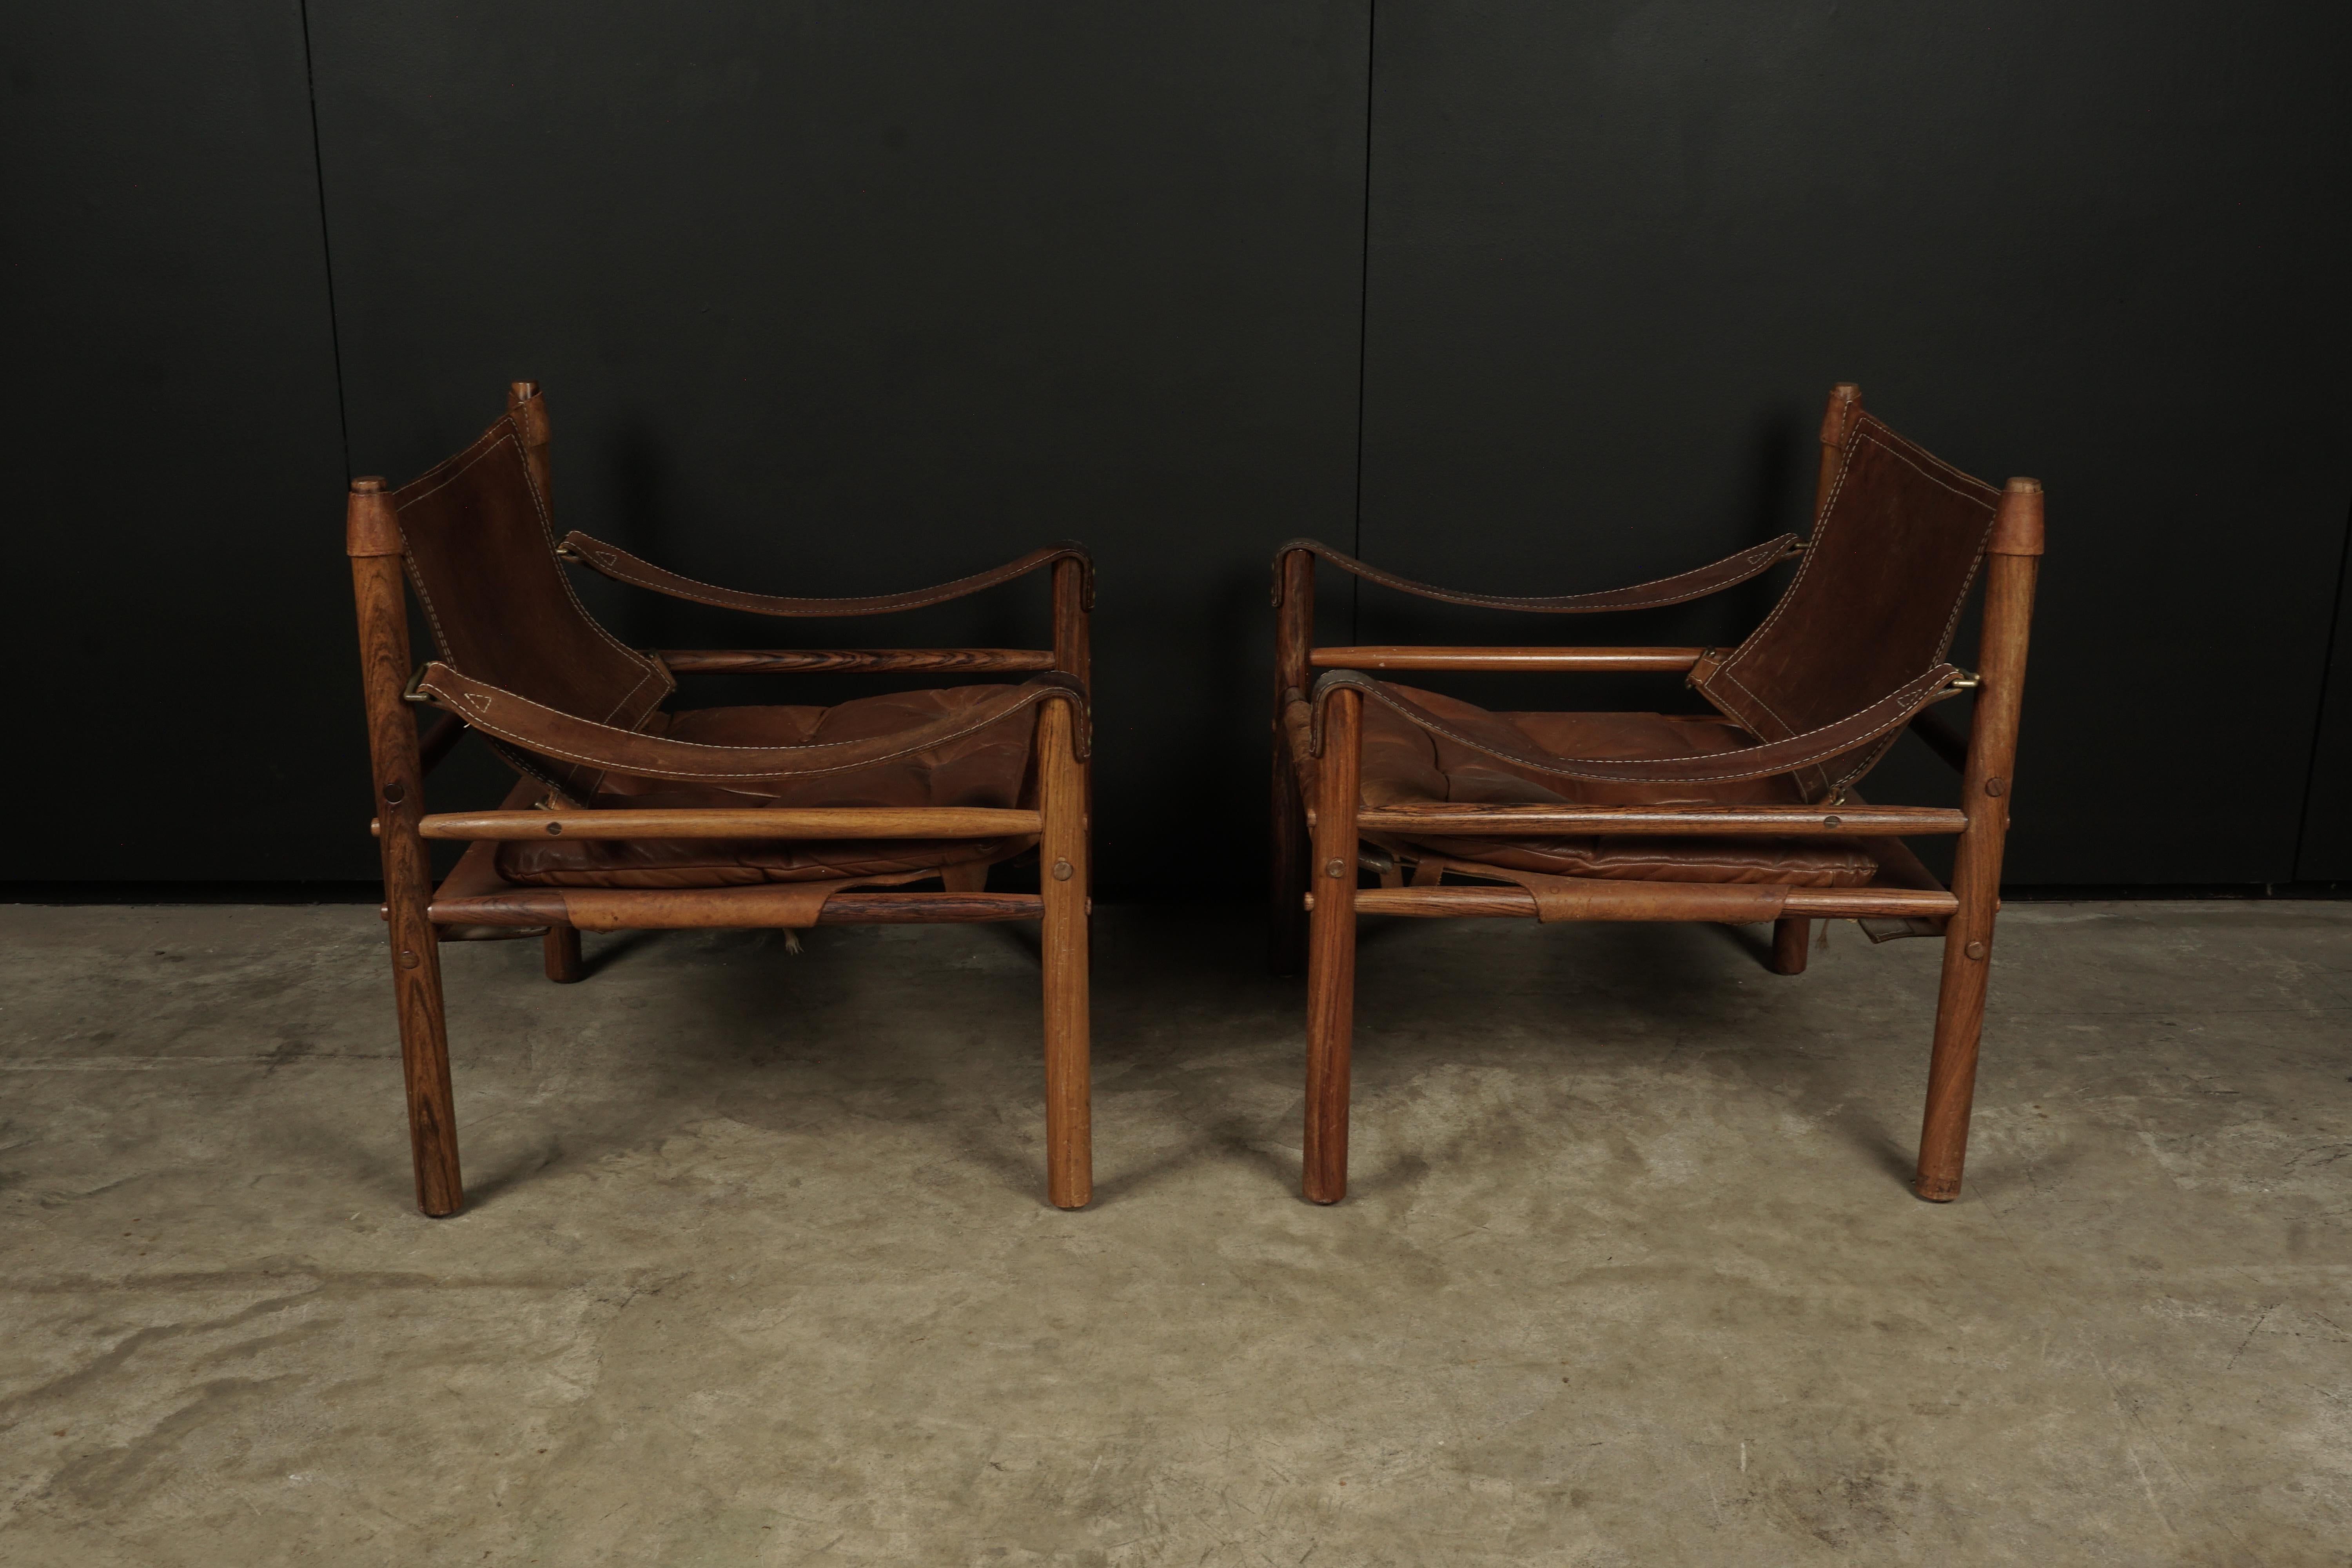 European Pair of Arne Norell Safari Lounge Chairs, Model Sirocco, Sweden, 1970s